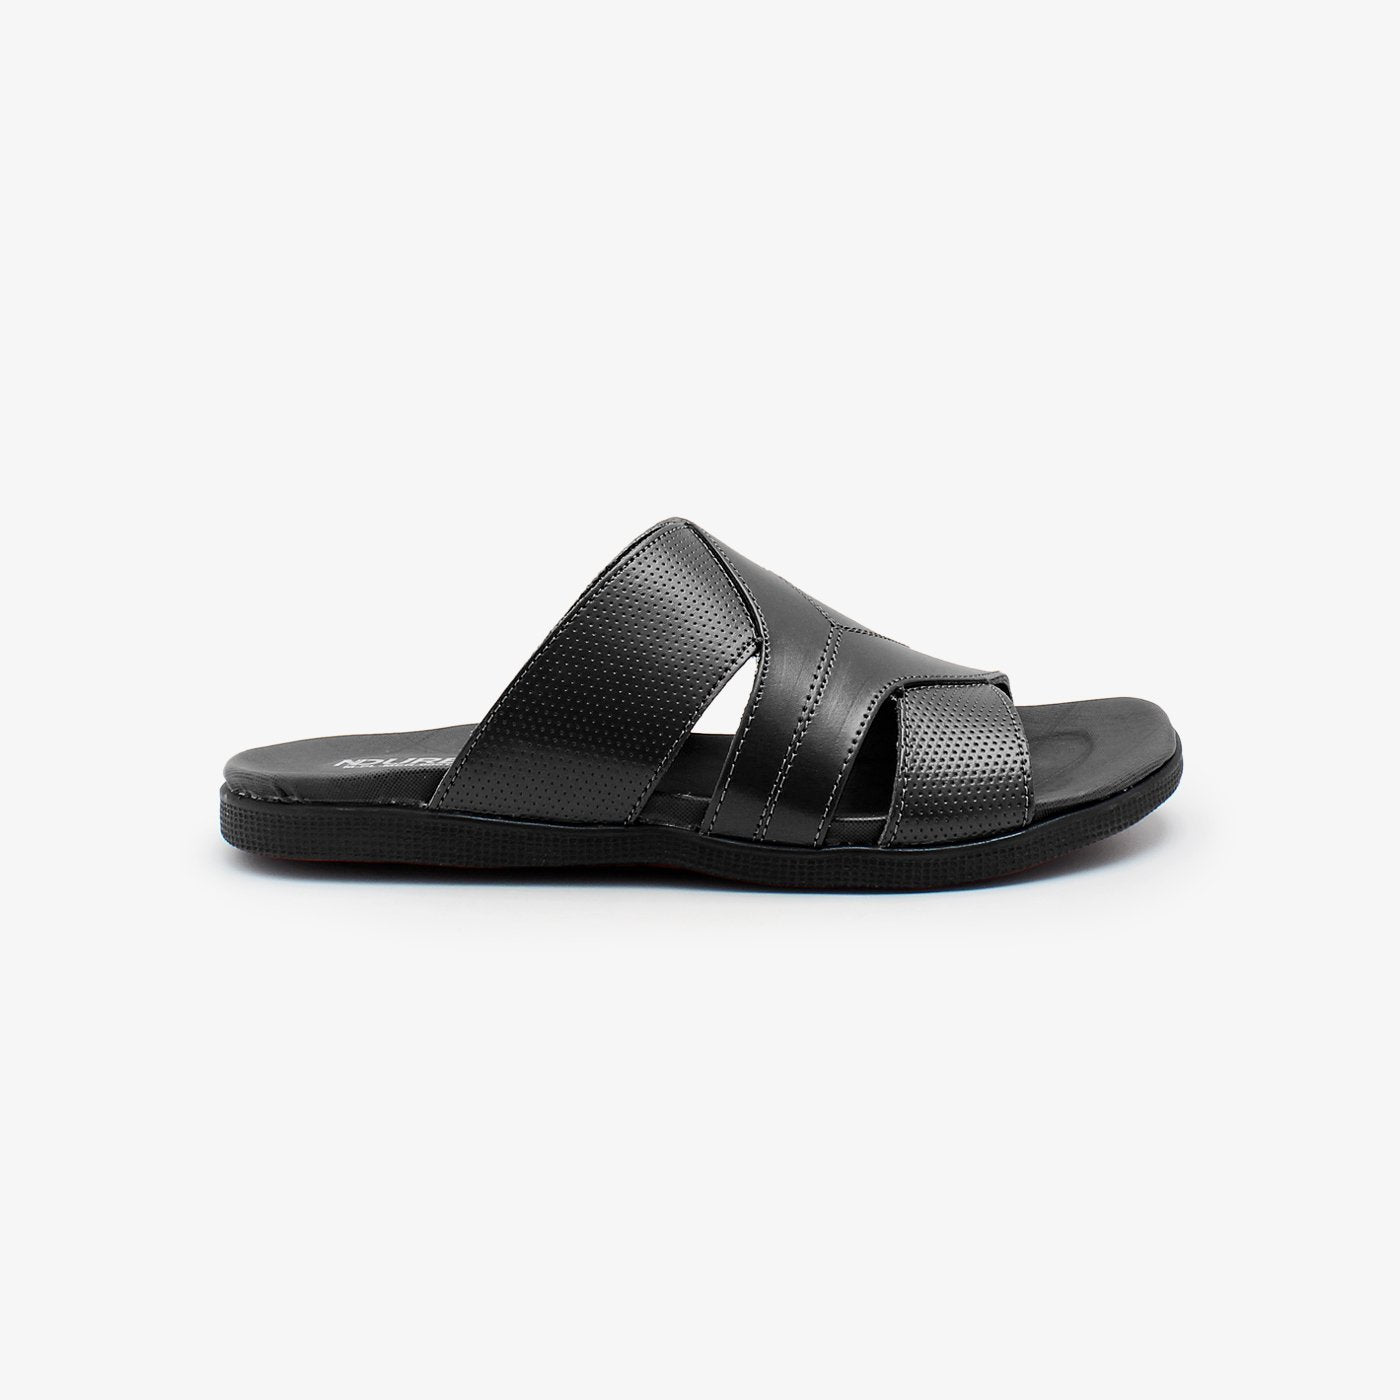 Cross Strapped Mens Chappals